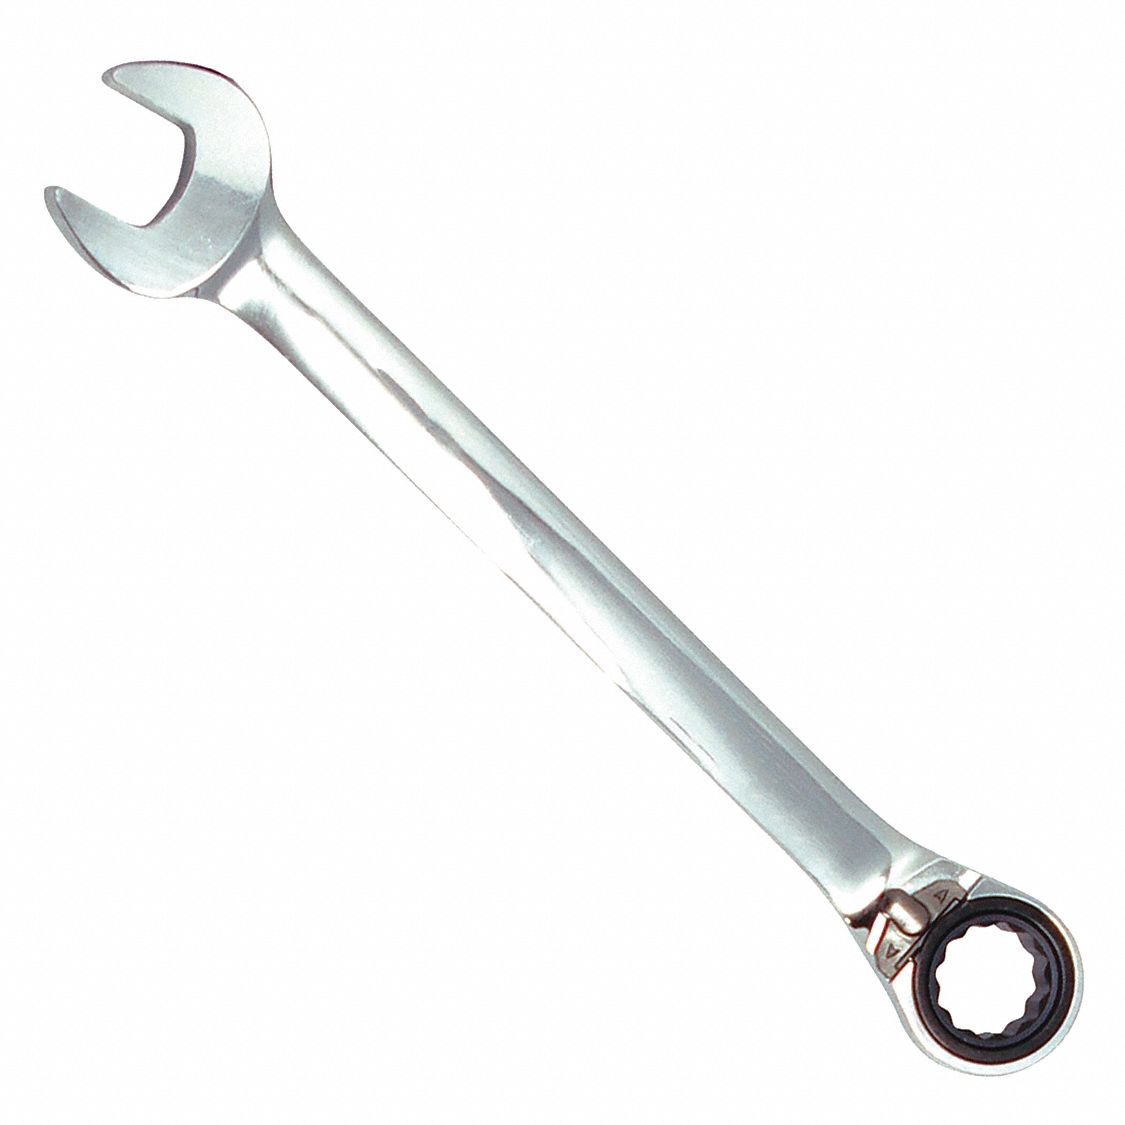 Combination Wrench: Alloy Steel, Chrome, 3/4 in Head Size, 9 3/4 in Overall Lg, Offset